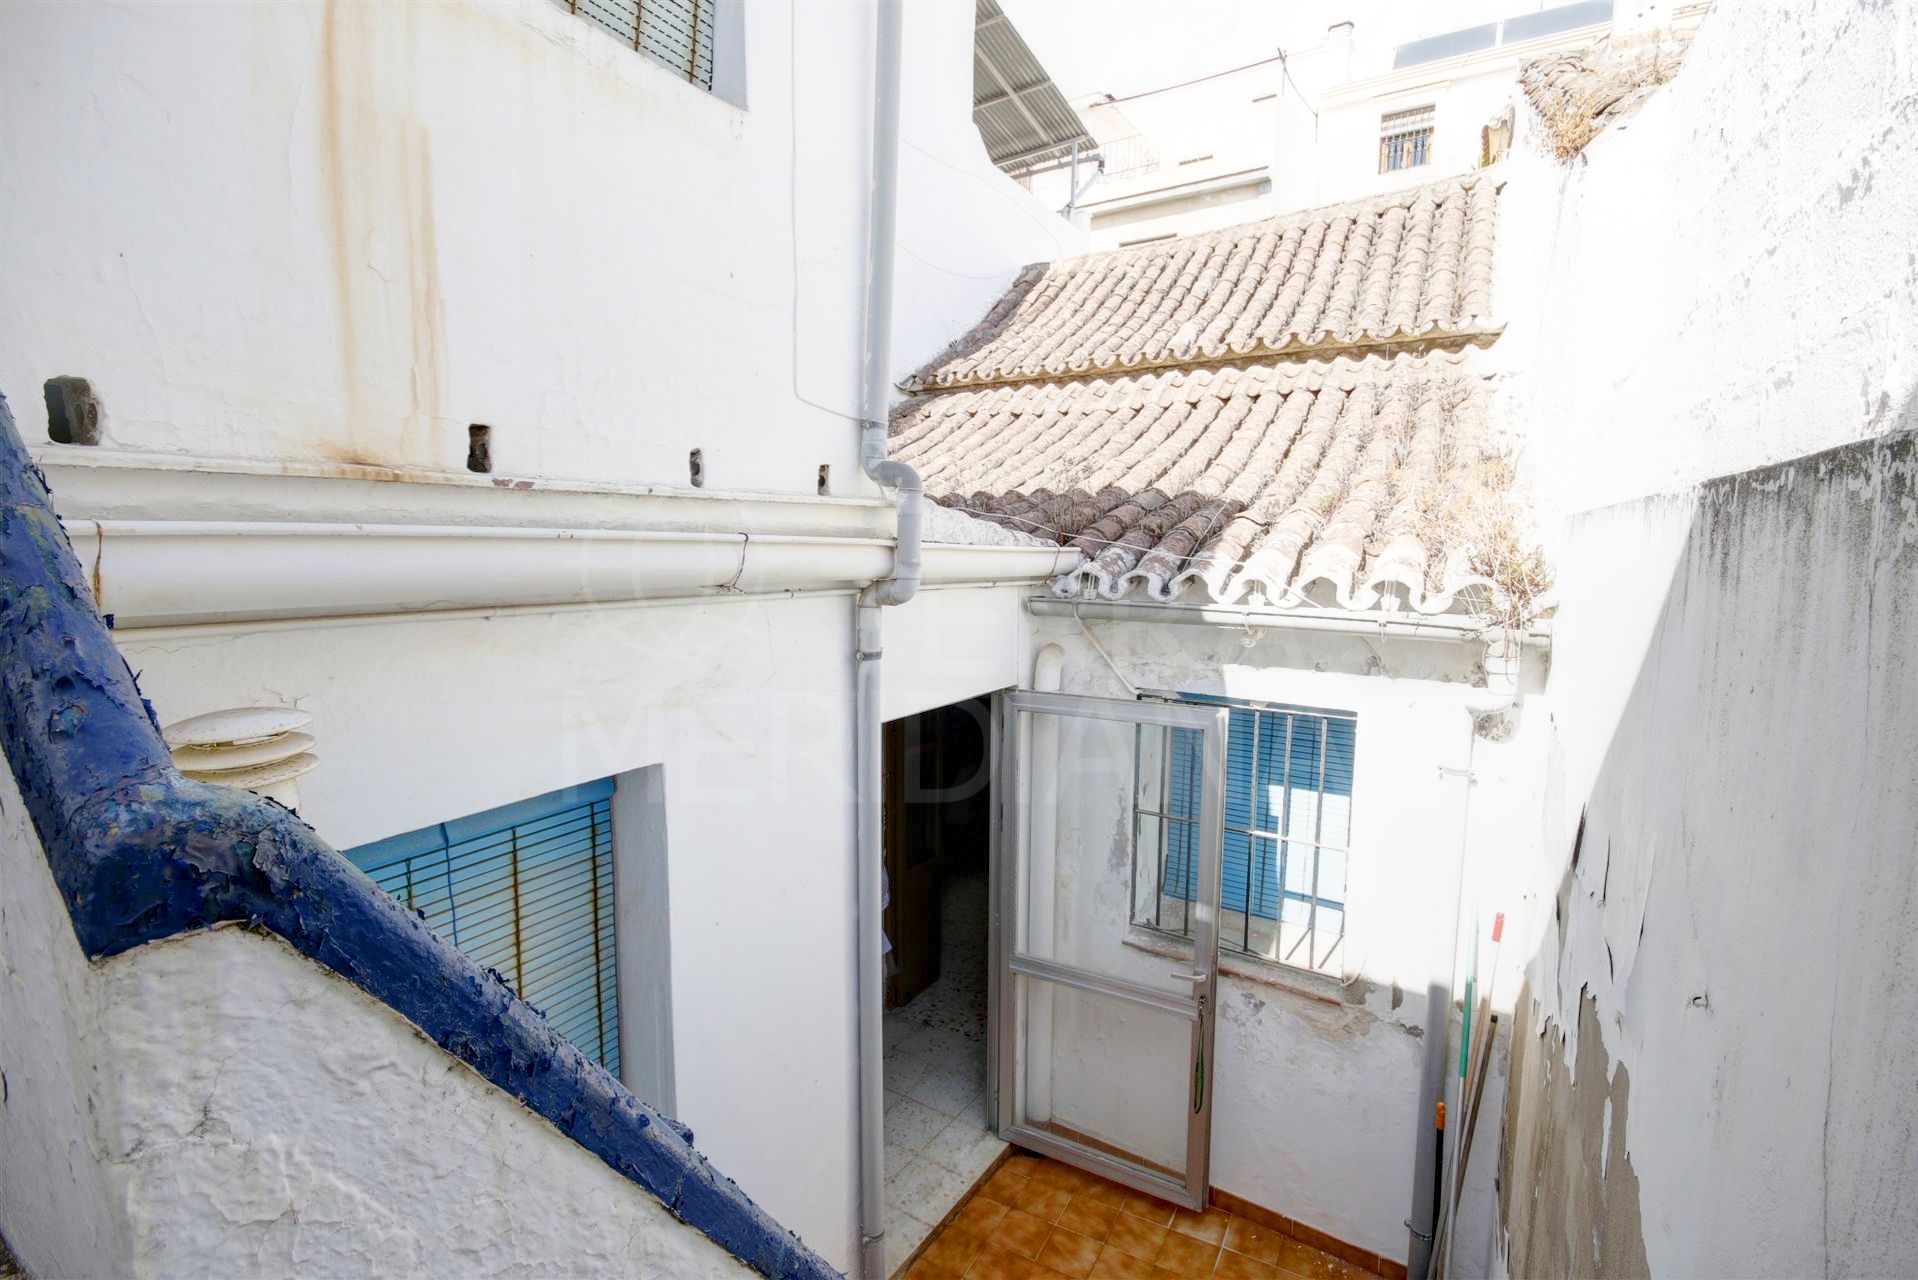 Charming property for sale, to renovate in the old town of Estepona